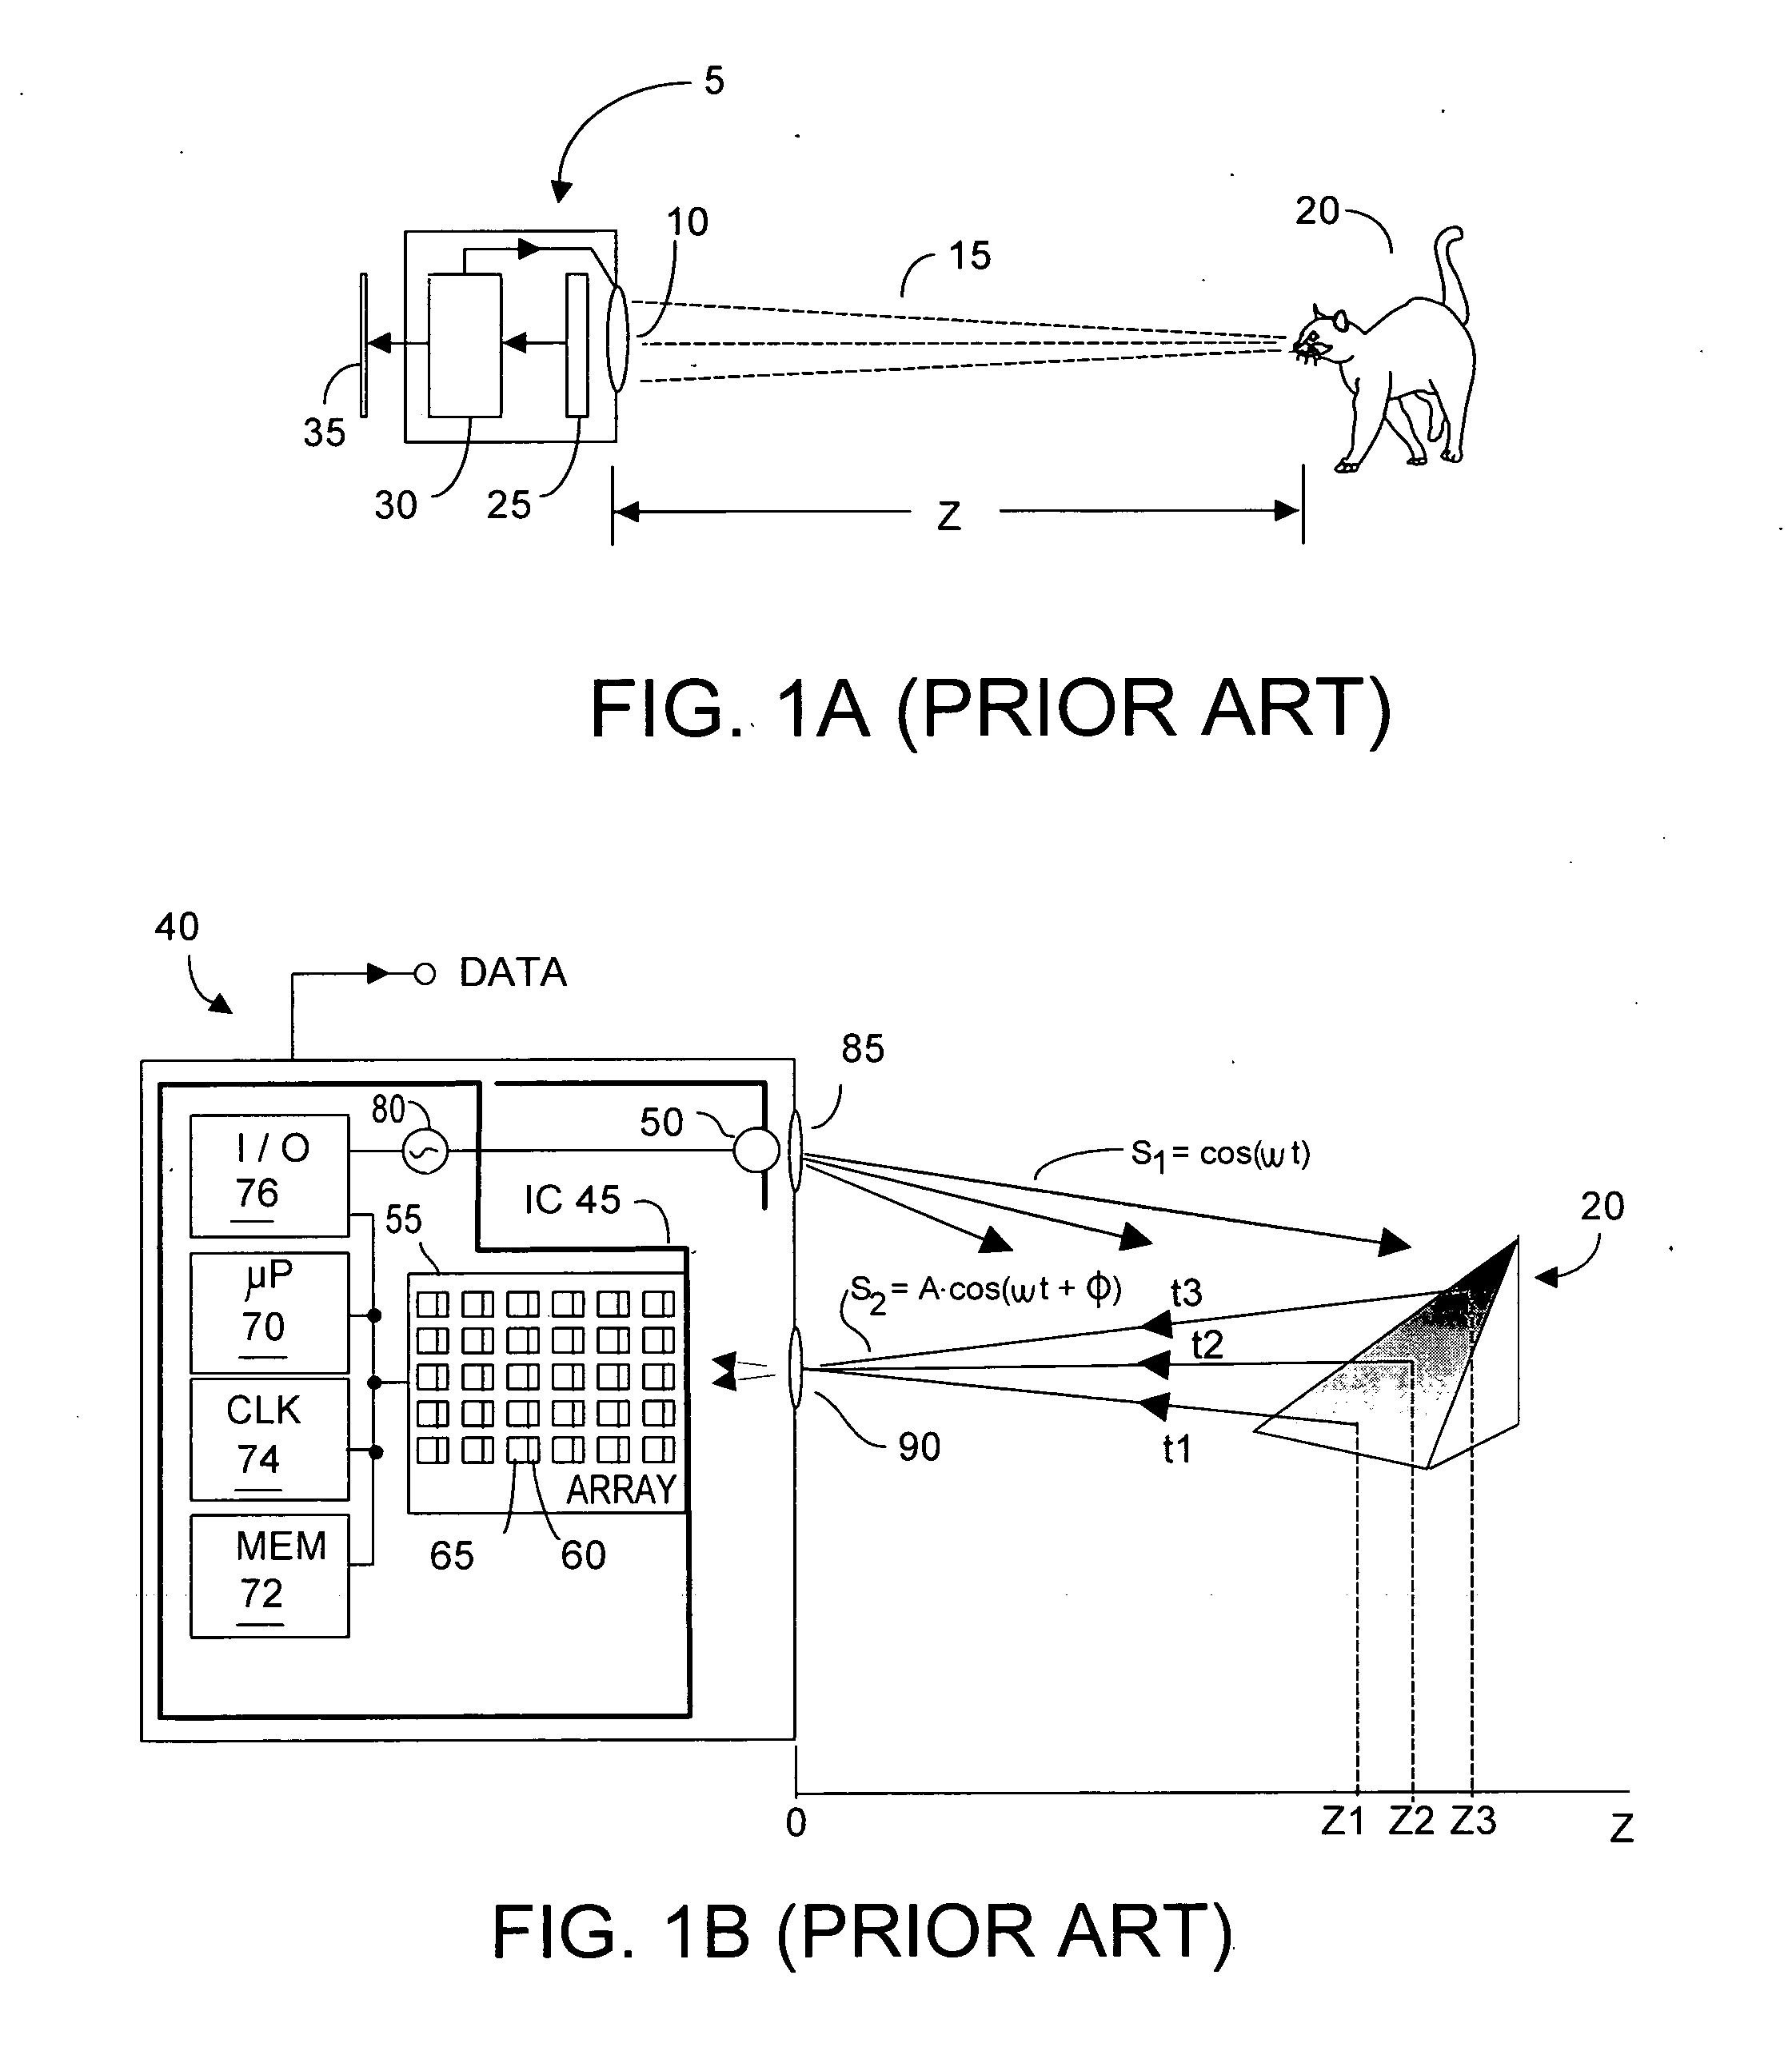 Method and system to increase X-Y resolution in a depth (Z) camera using red, blue, green (RGB) sensing